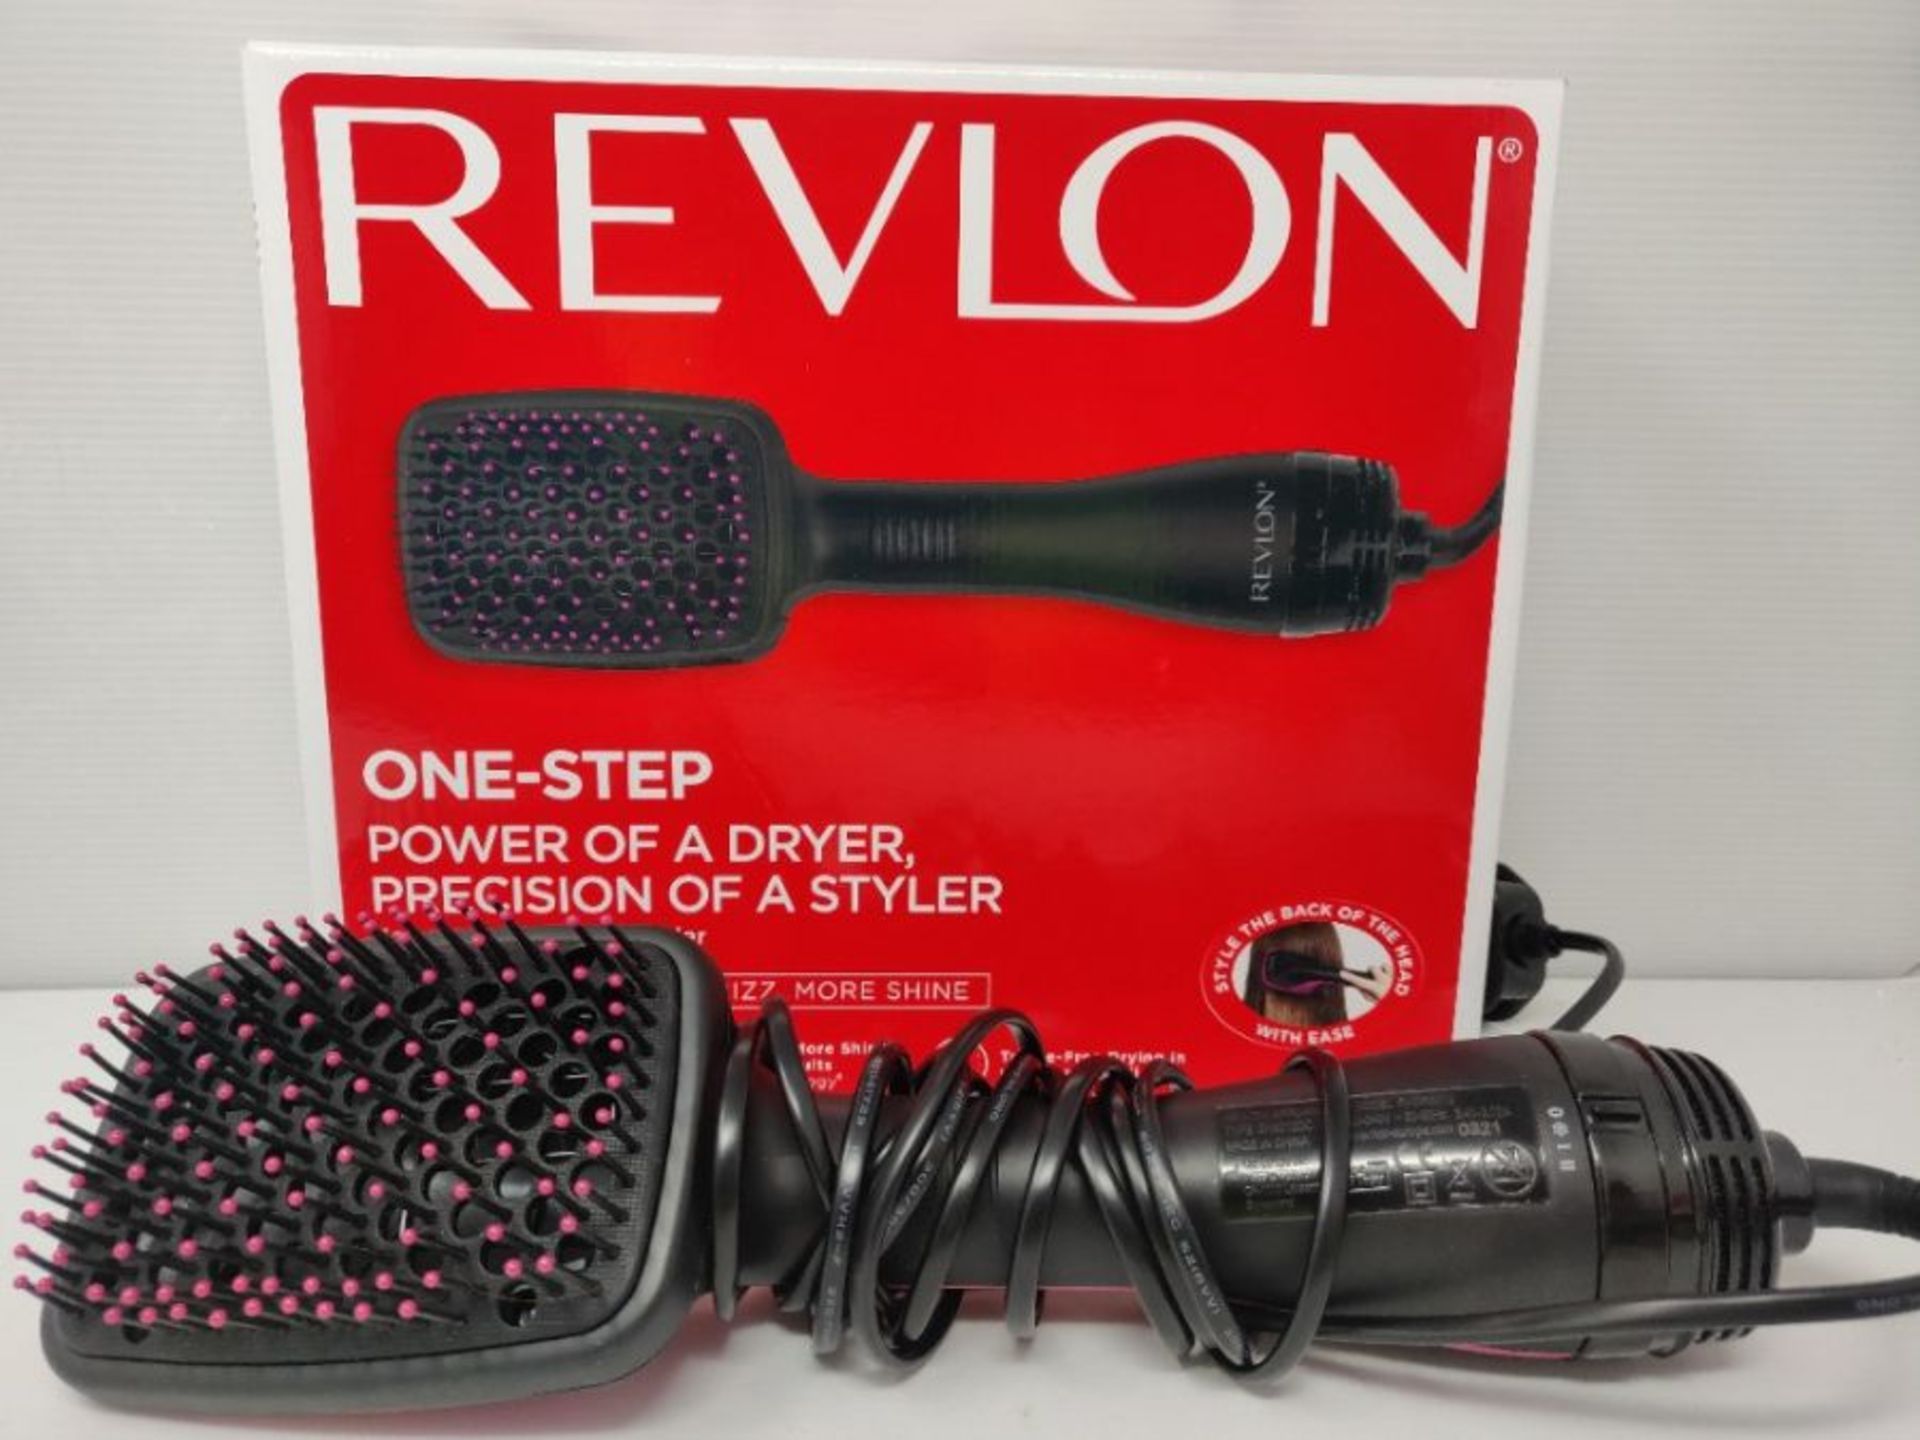 REVLON Pro Collection Salon One Step Hair Dryer and Styler - Image 2 of 2